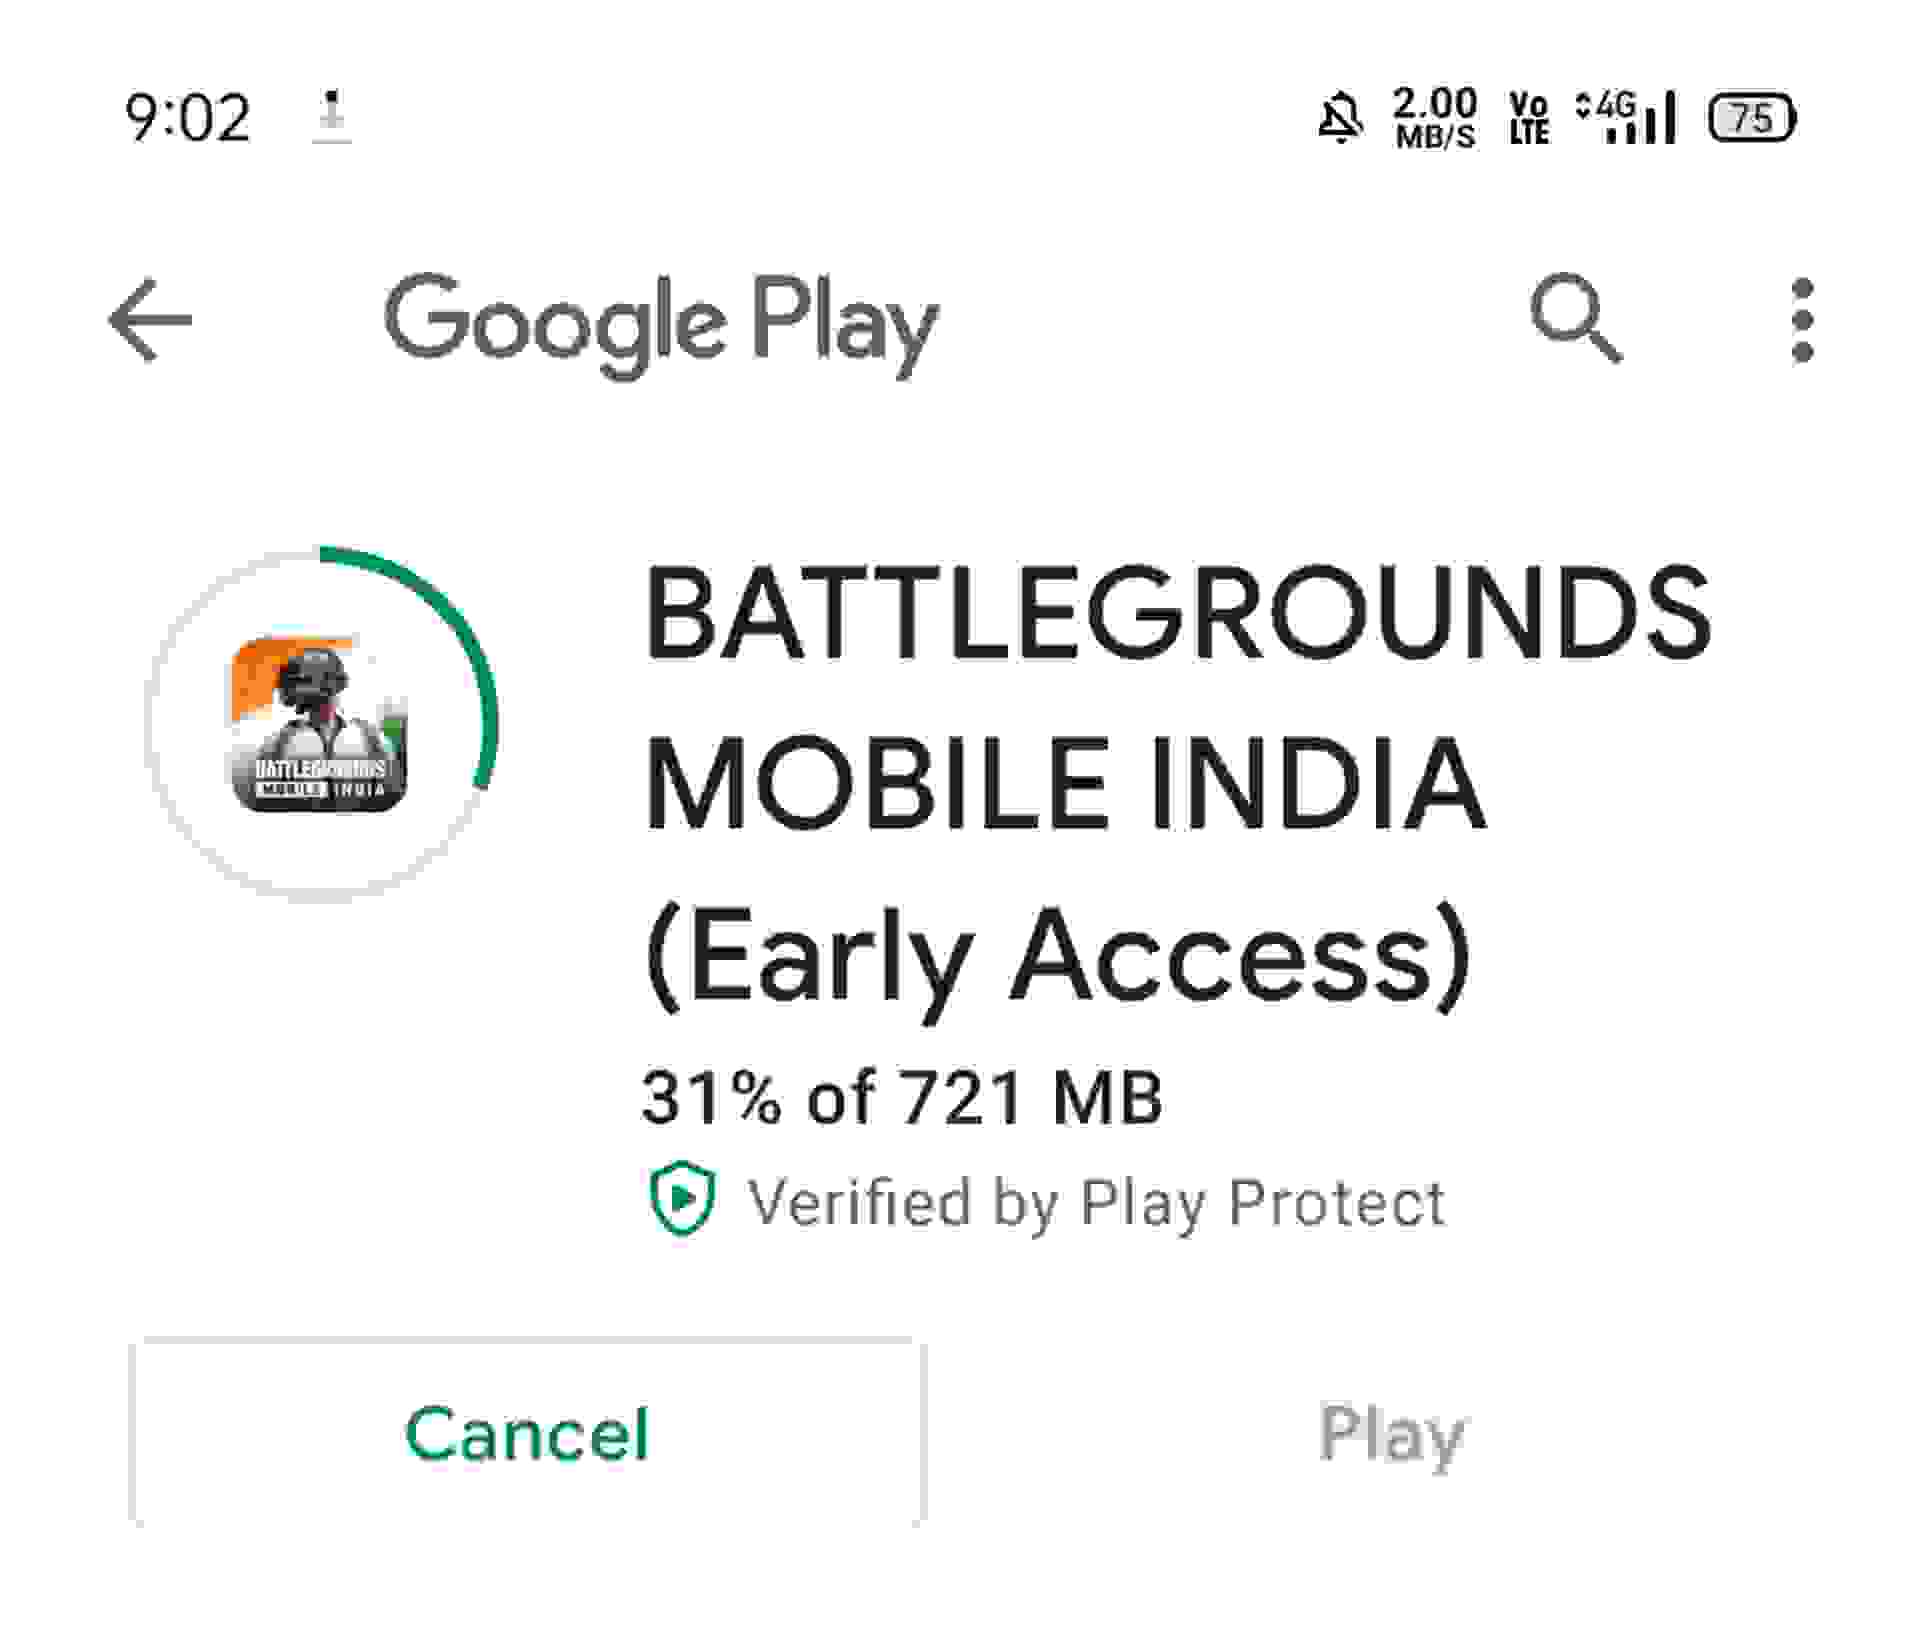 Battlegrounds mobile india game download link